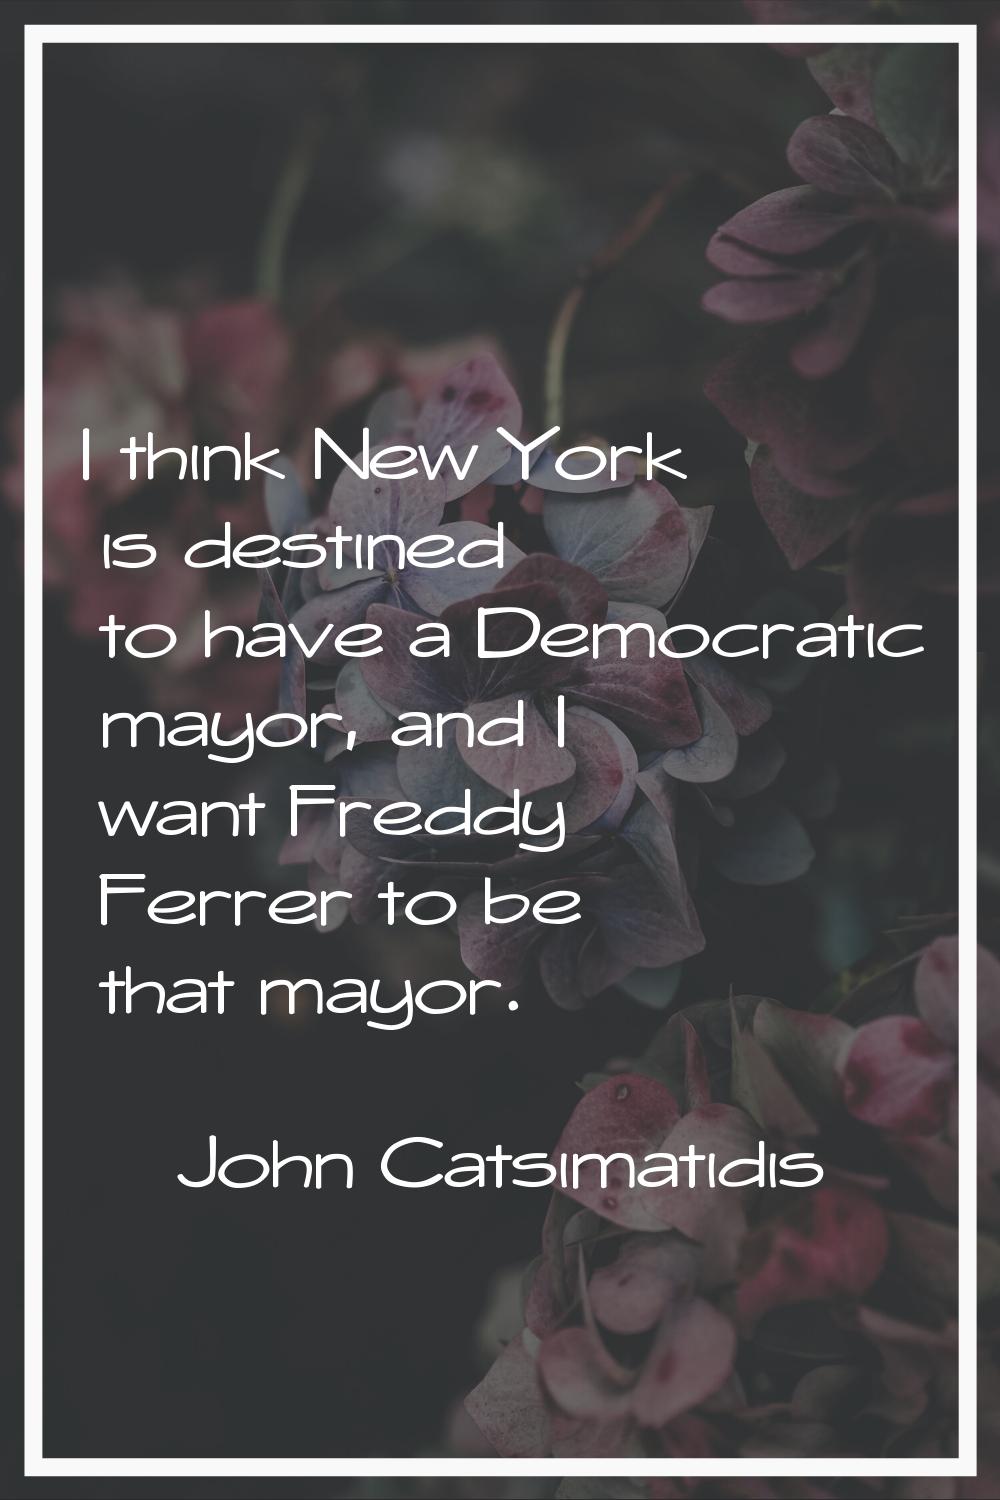 I think New York is destined to have a Democratic mayor, and I want Freddy Ferrer to be that mayor.